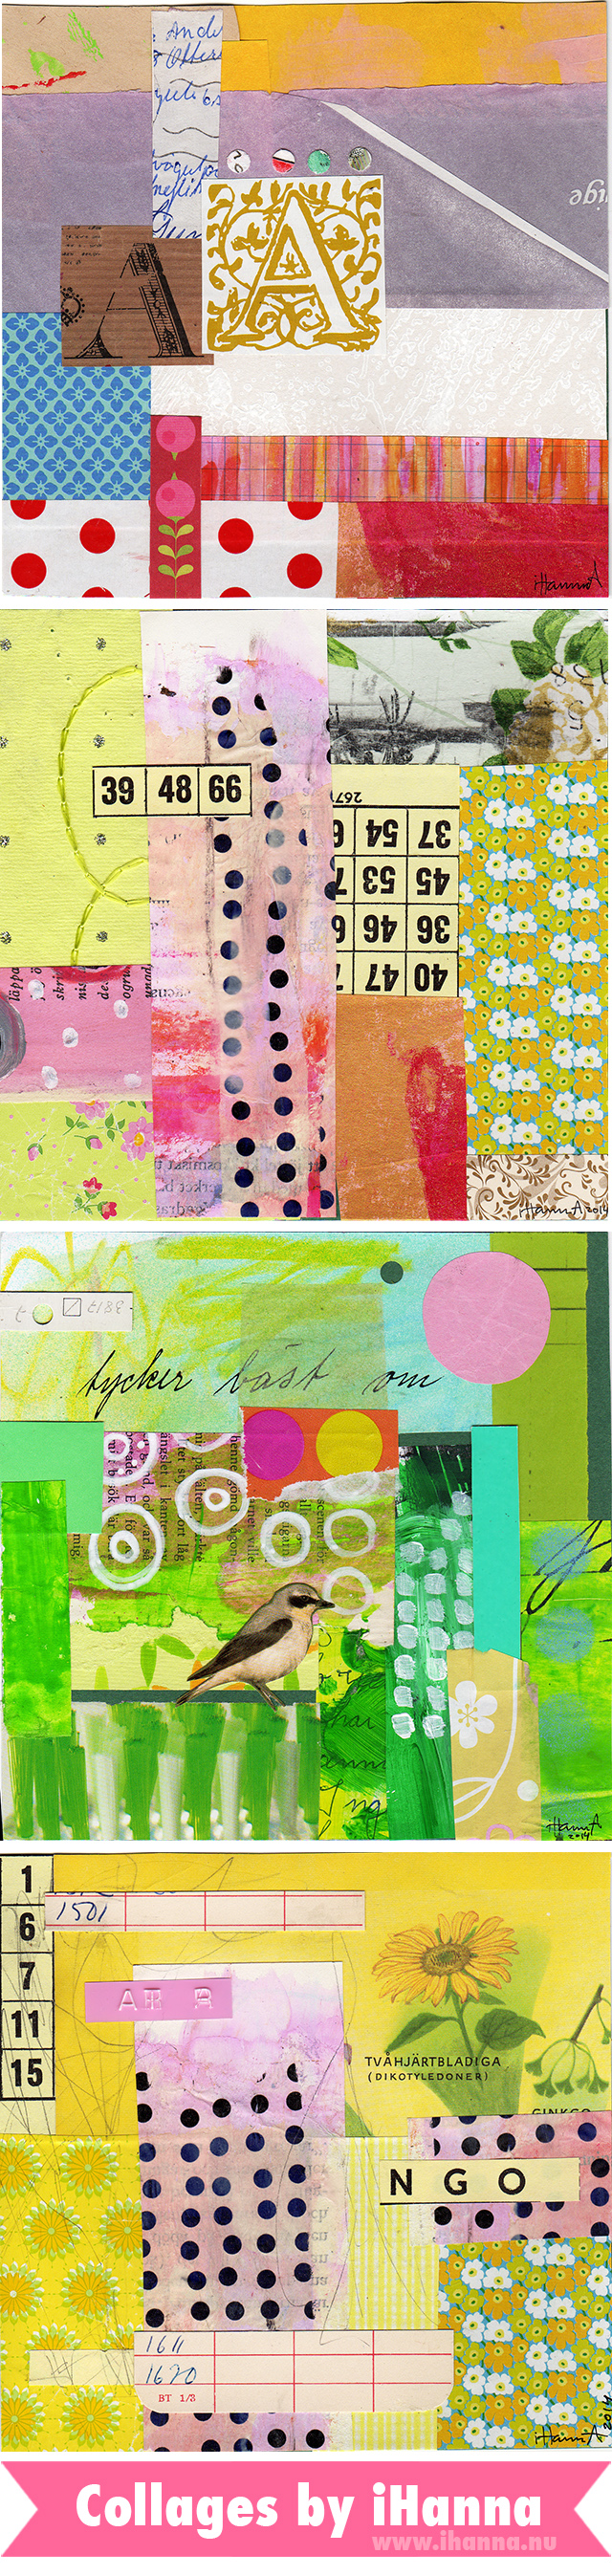 Four new collages by iHanna of www.ihanna.nu - April 2014 #collage